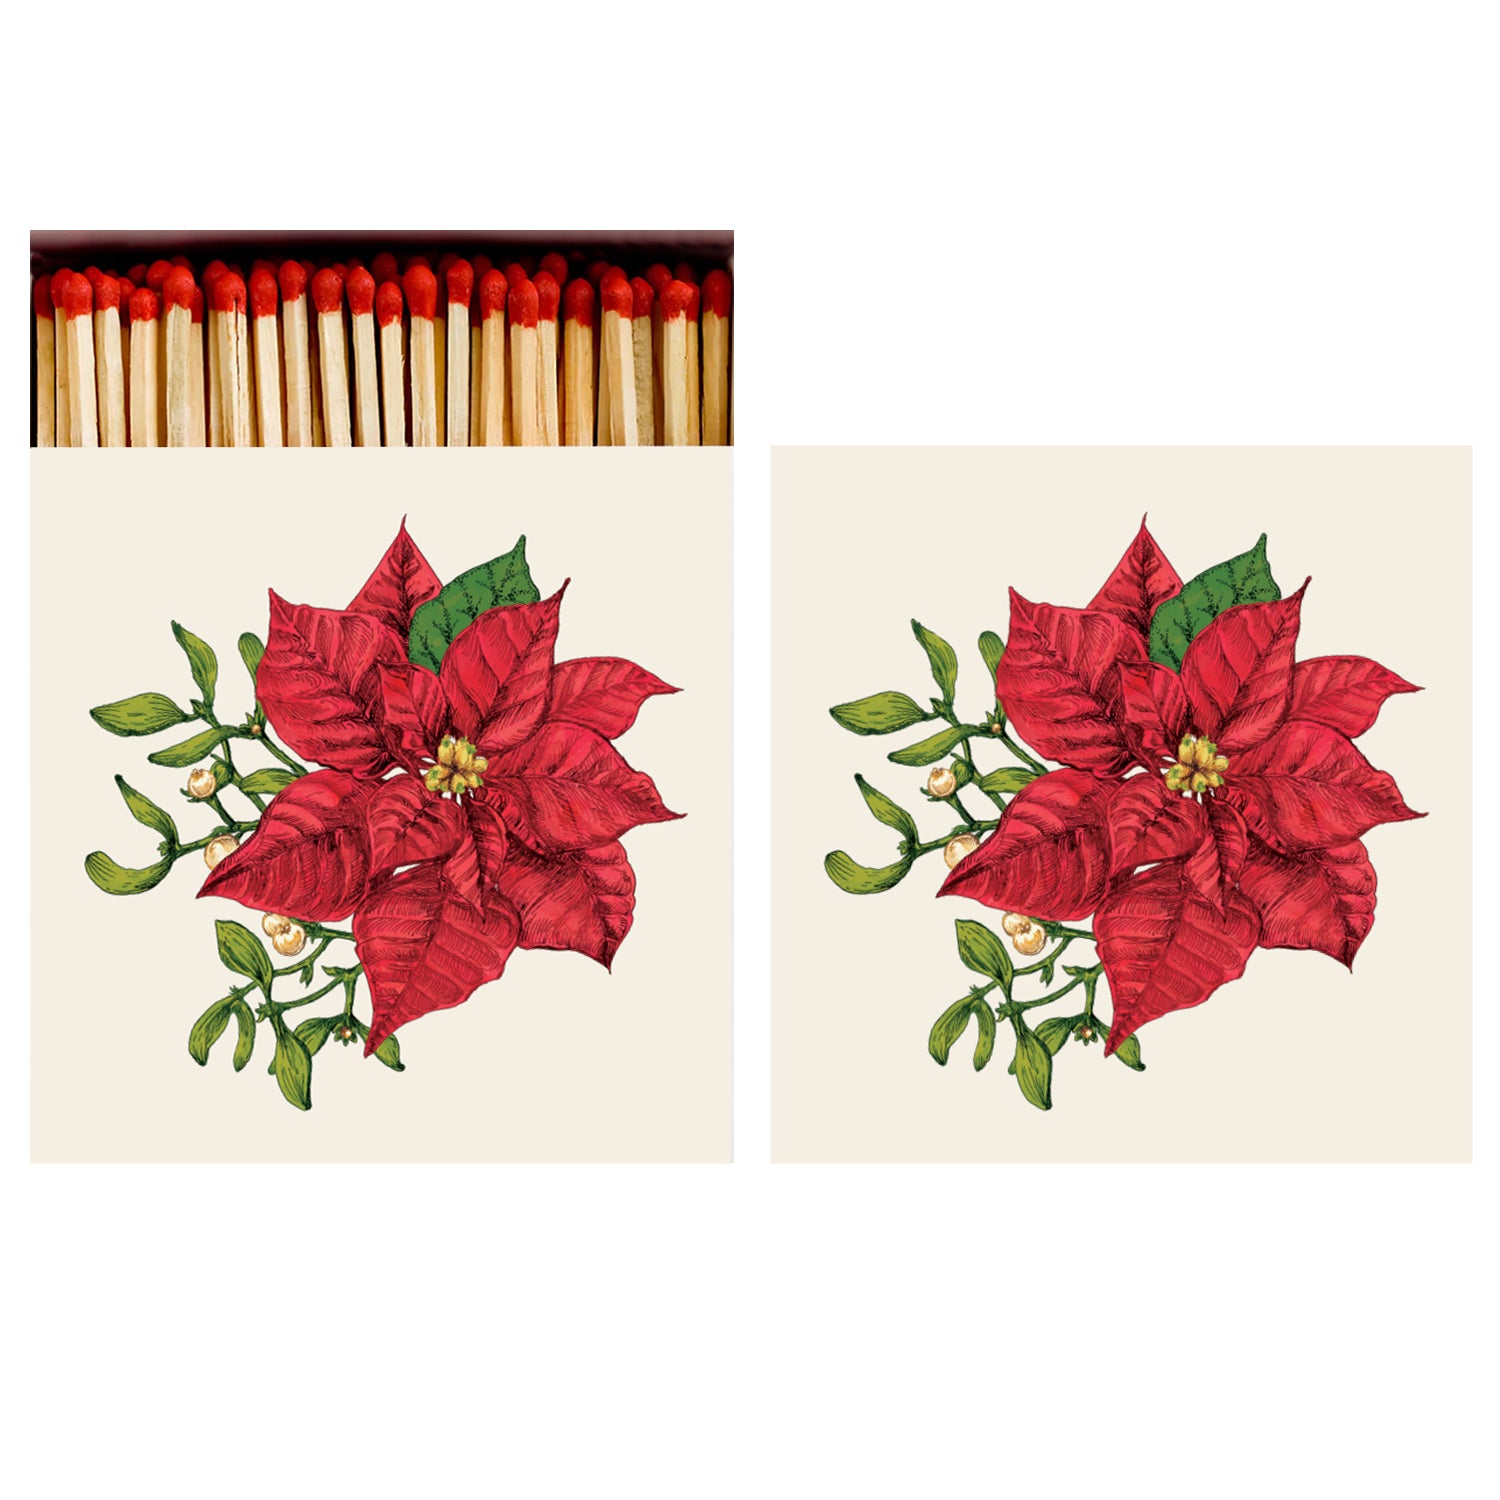 Two identical sides of a square match box, the left of which is open slightly to reveal the matches inside. The artwork on the box depicts an illustrated red poinsettia bloom with green leaves and mistletoe on a cream background.